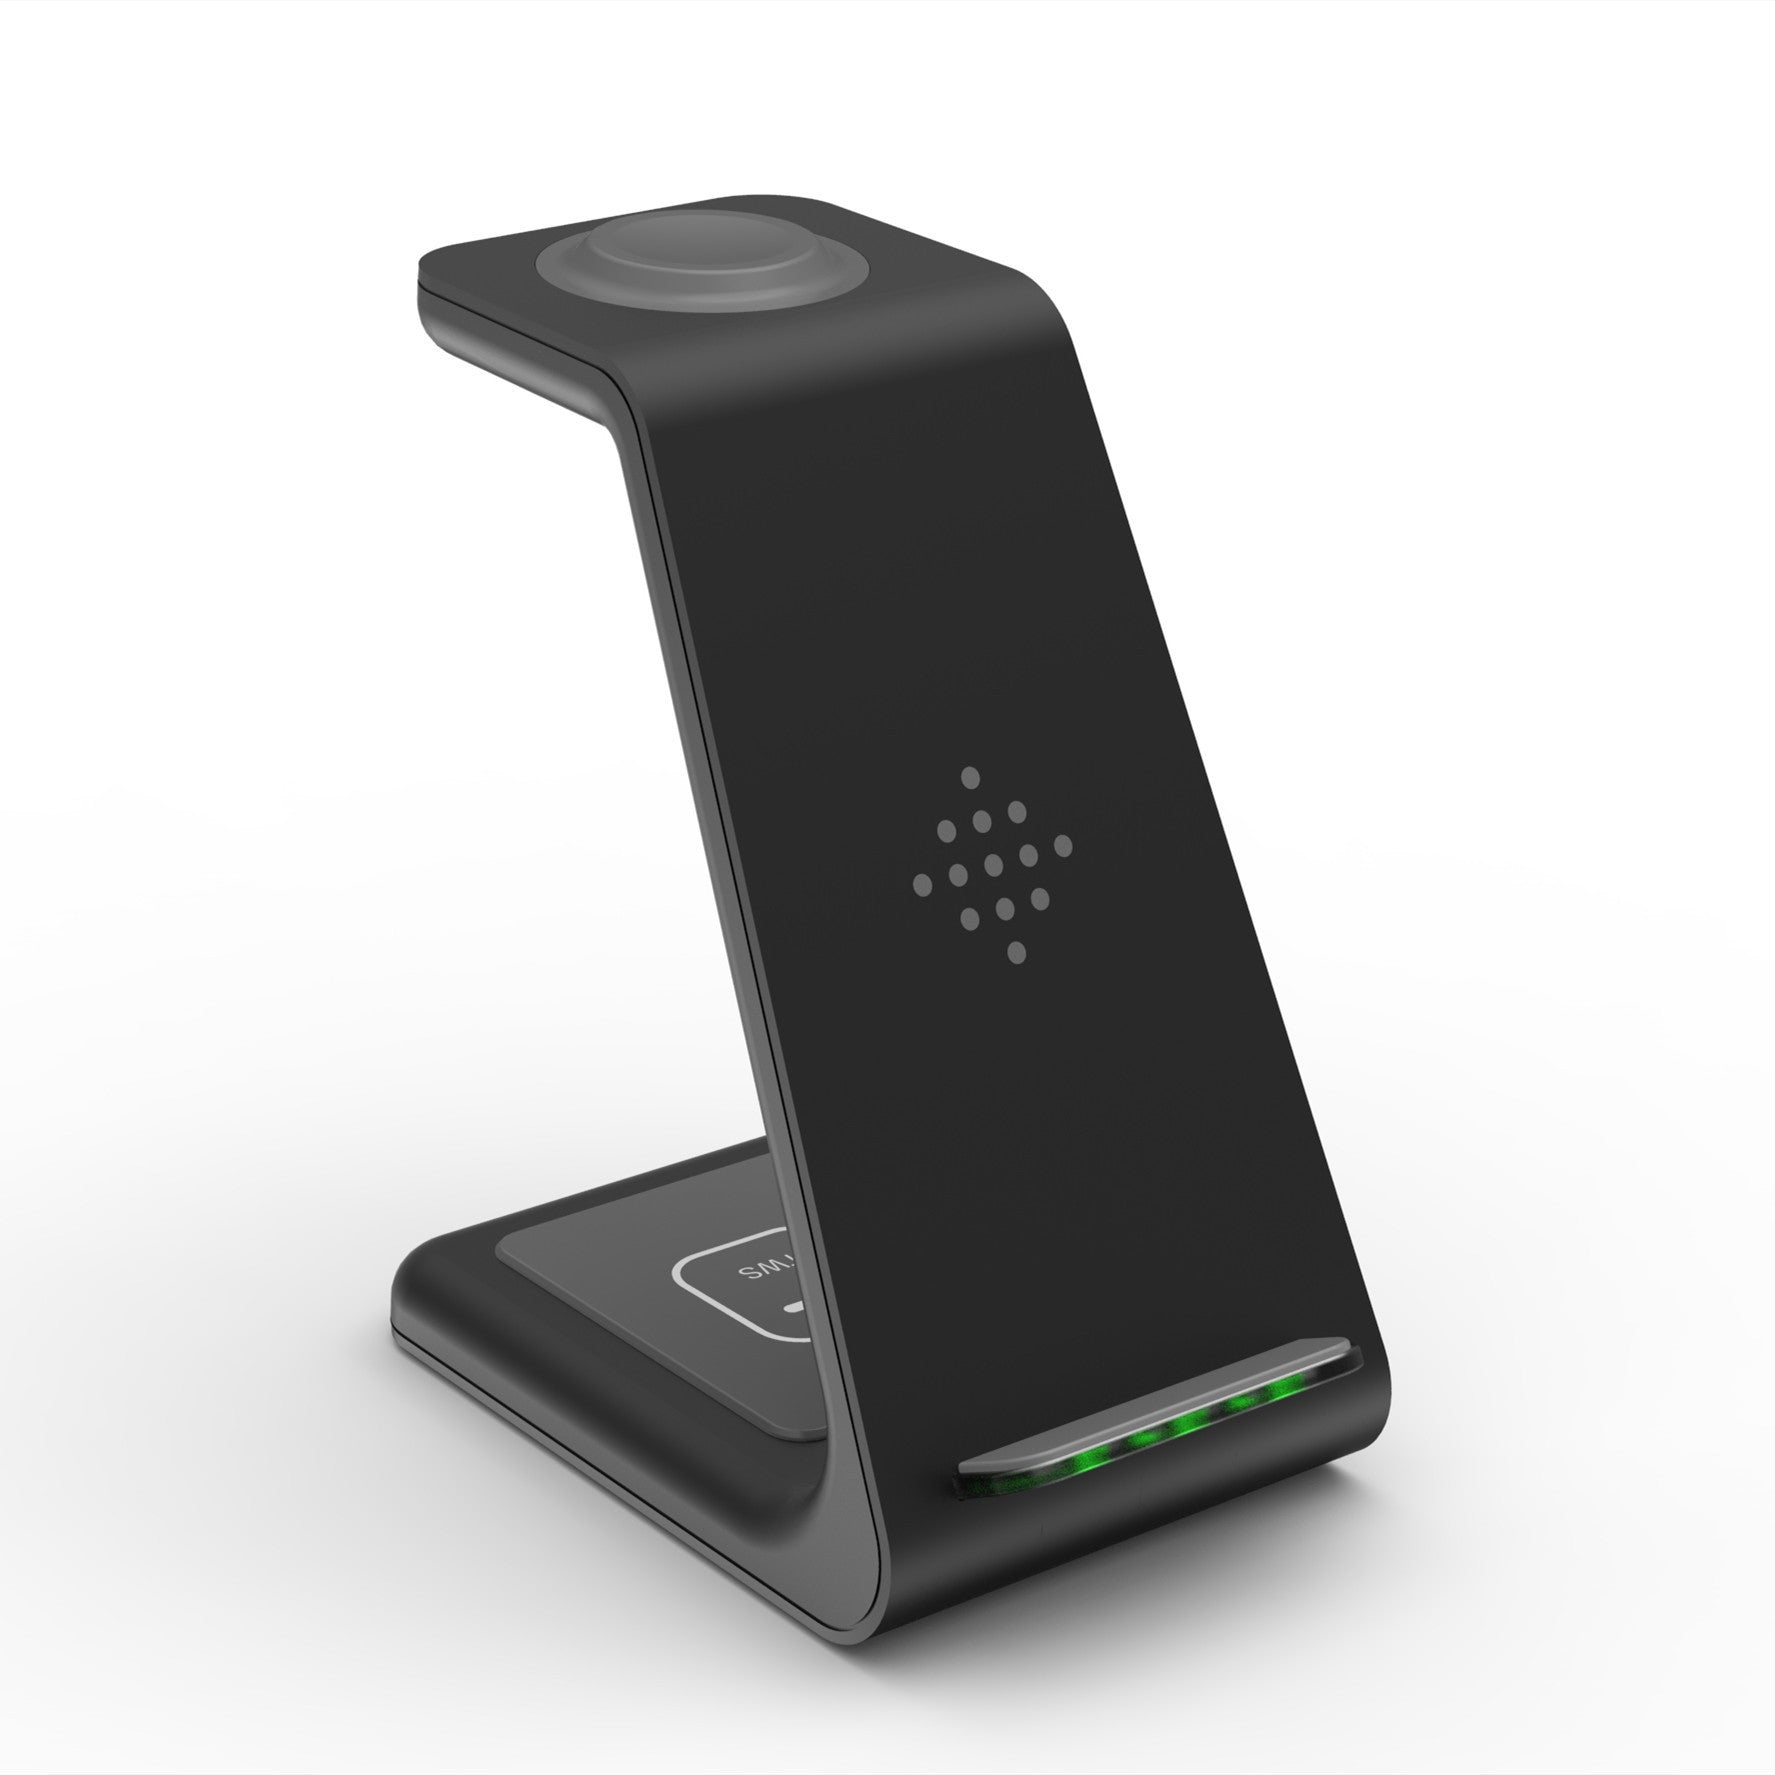 3-in-1 Wireless Charging,Stand,Fast Charging,Stylish Design